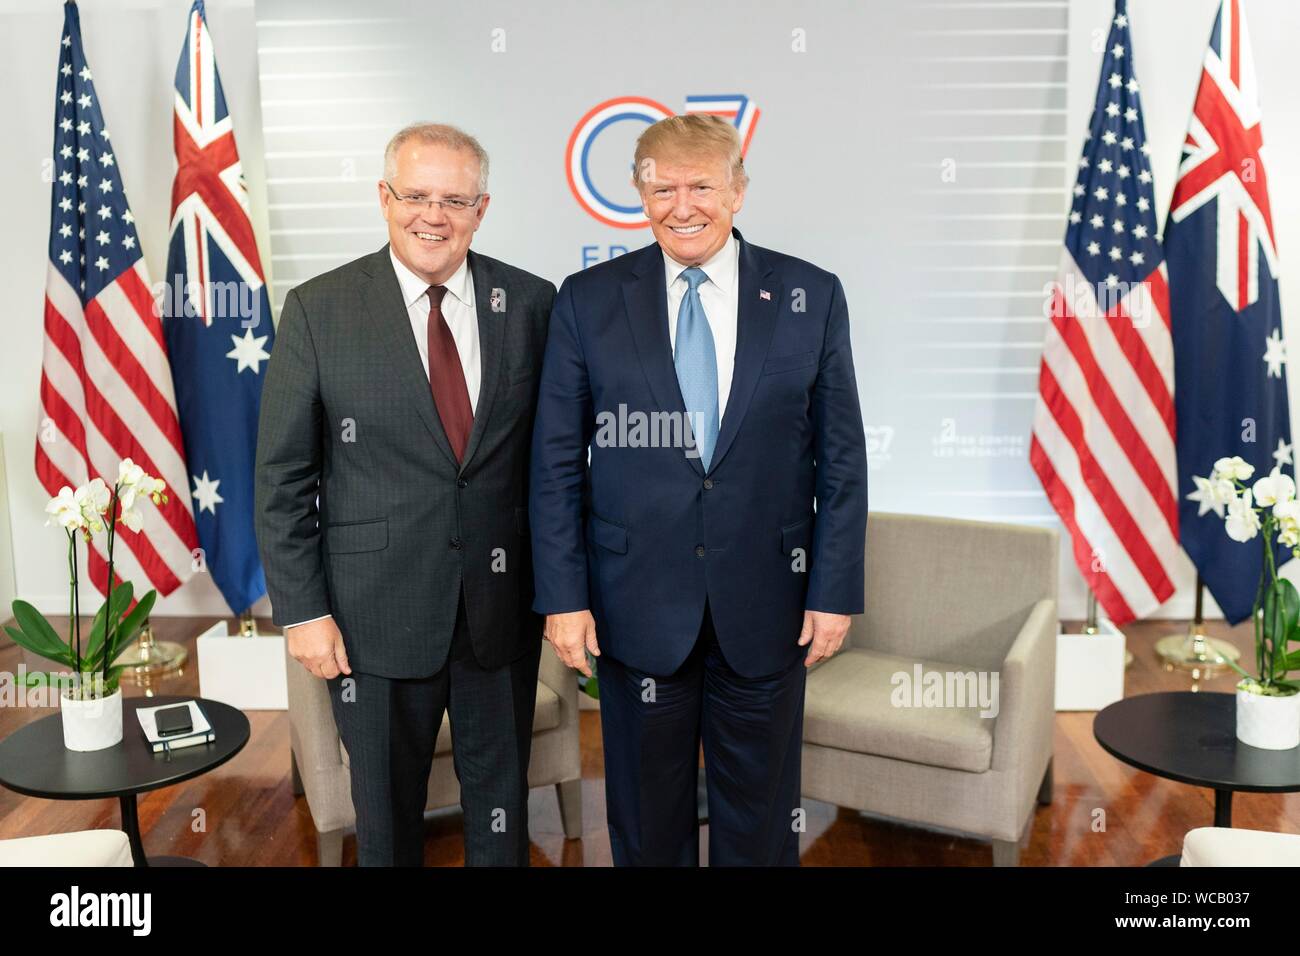 U.S. President Donald Trump stands with Australian Prime Minister Scott Morrison, left, prior to their bilateral meeting on the sidelines of the G7 Summit at the Centre de Congrés Bellevue August 25, 2019 in Biarritz, France. Stock Photo